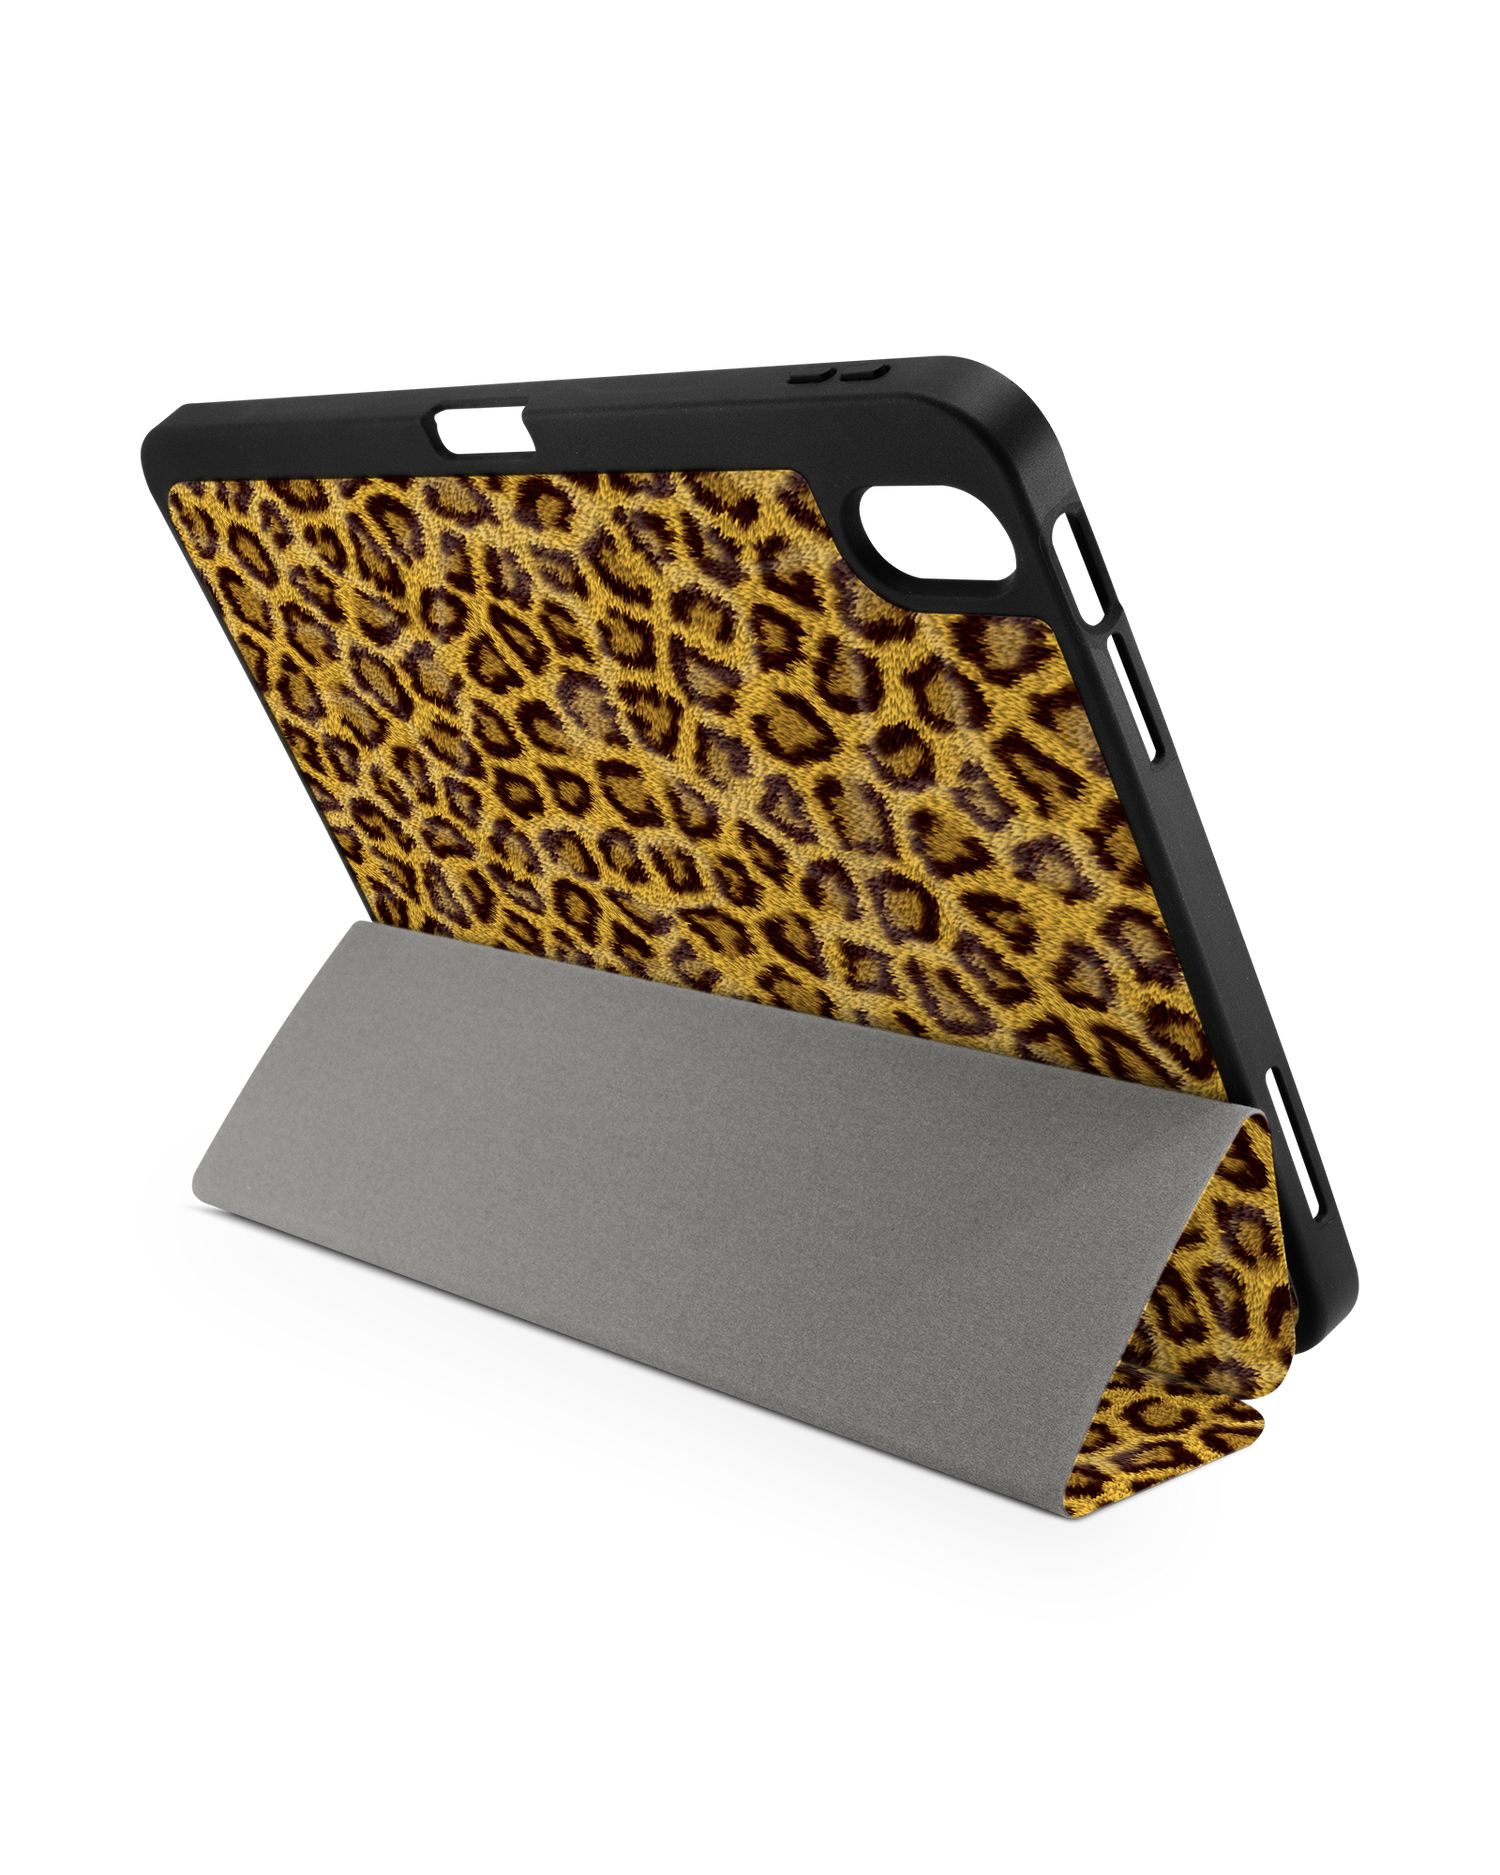 Leopard Skin iPad Case with Pencil Holder for Apple iPad (10th Generation): Set up in landscape format (back view)